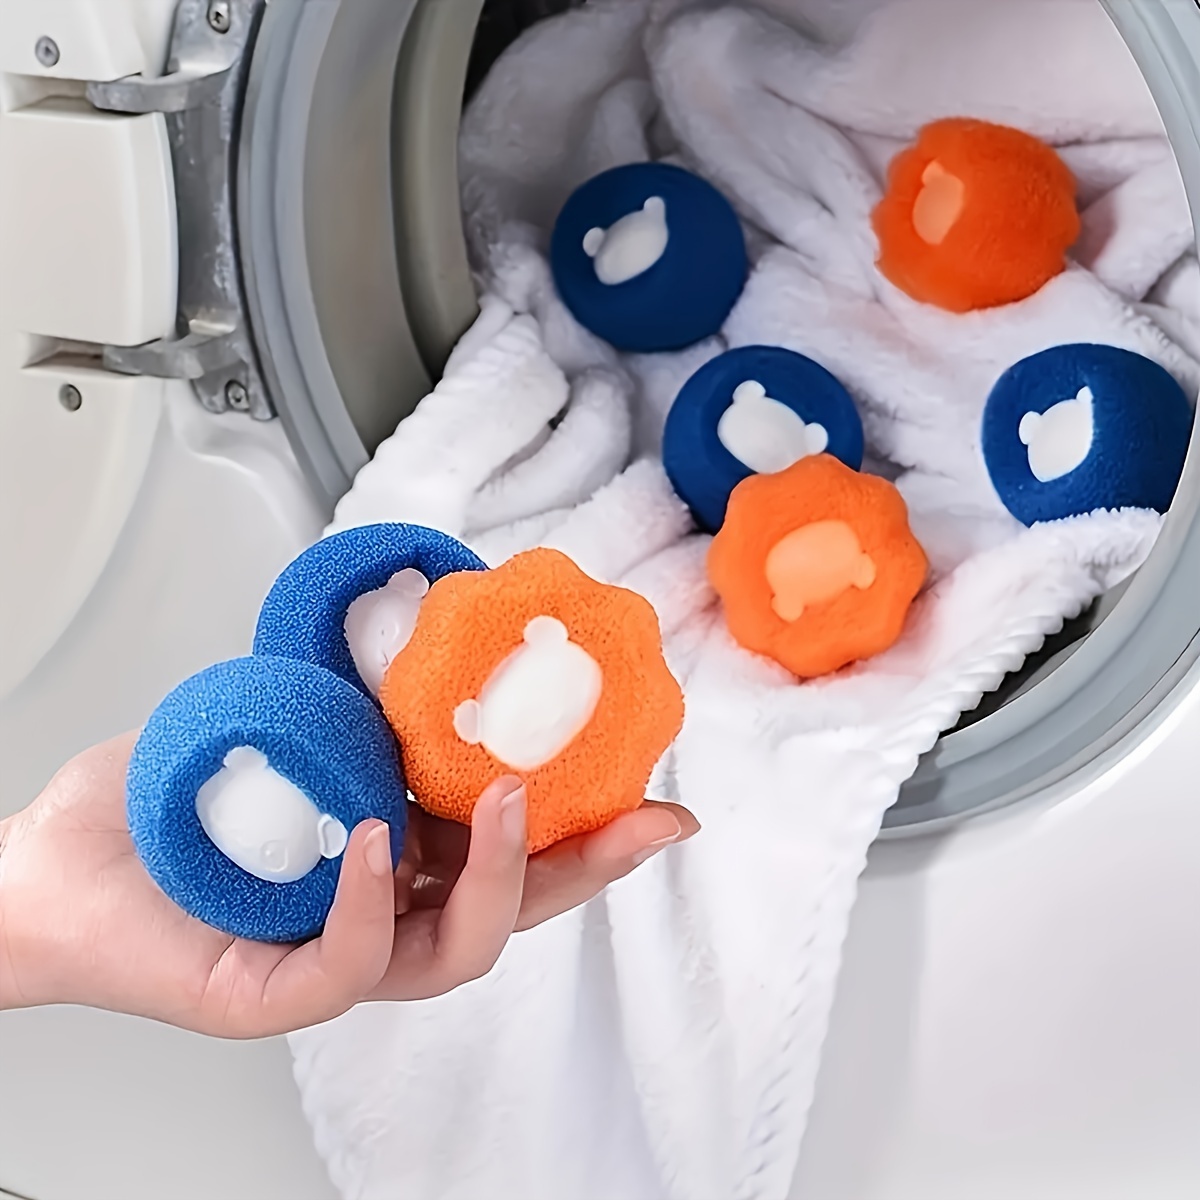 

10-piece Reusable Laundry Hair Catcher Balls - Pet Hair Remover For Clothes & Fabrics, Machine Washable Lint Cleaning Tool Laundry Accessories Pet Hair Remover For Laundry